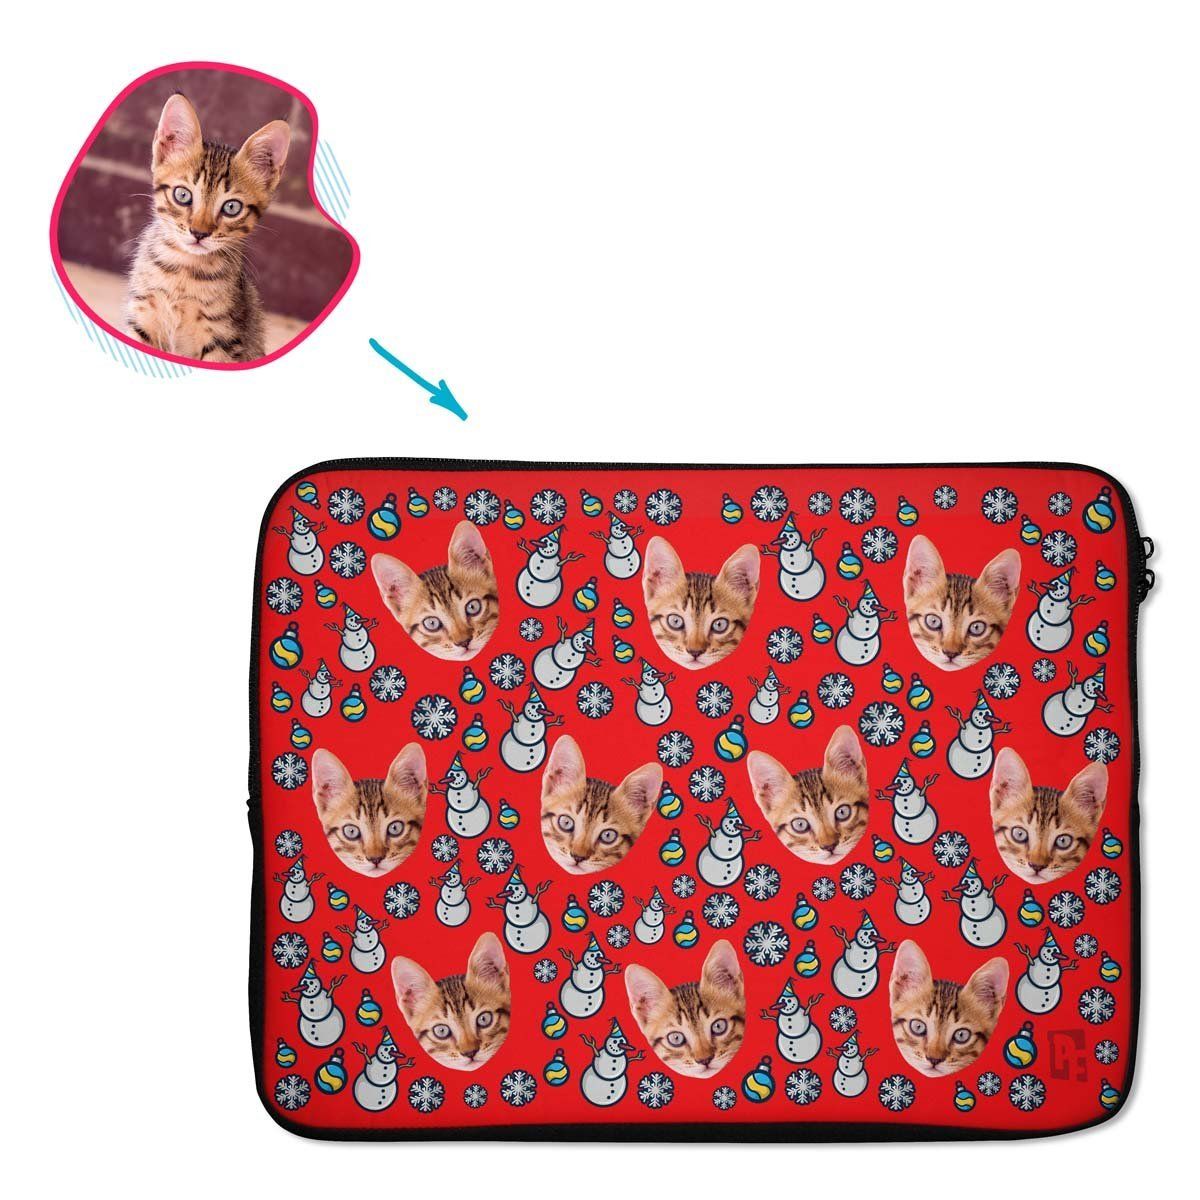 red Snowman laptop sleeve personalized with photo of face printed on them